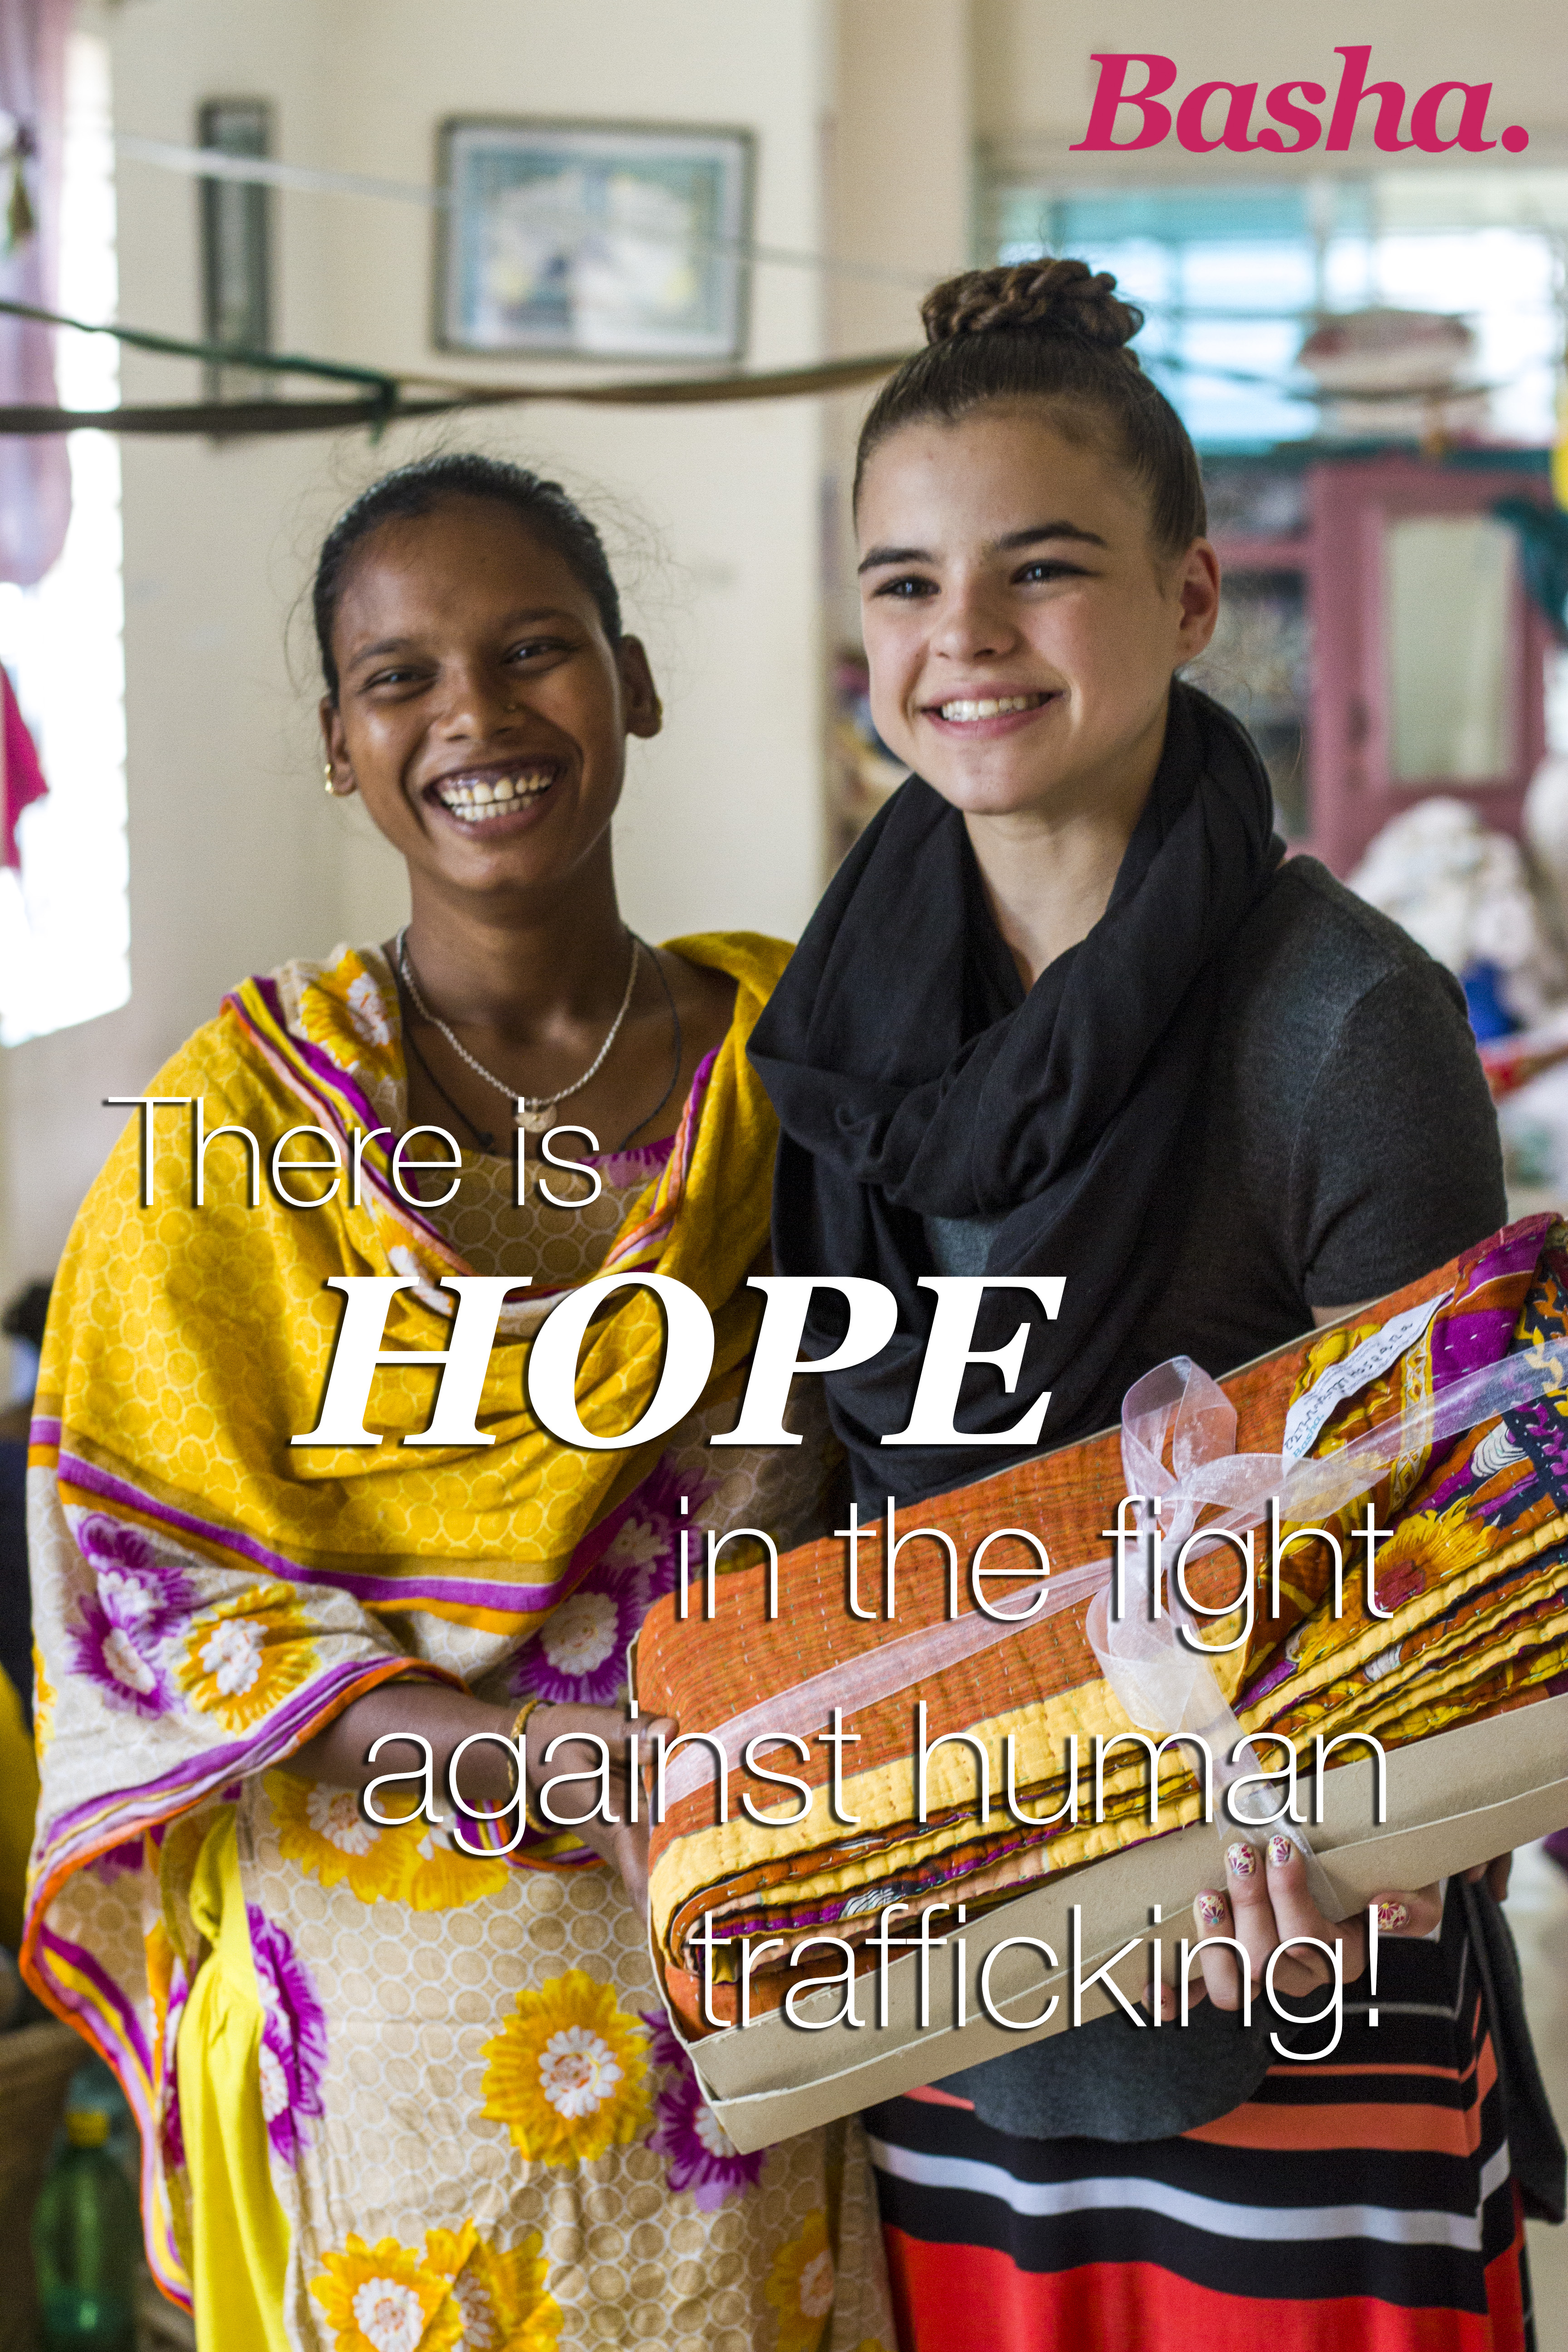 Photo of Basha artisan with customer and words There is hope in the fight against human trafficking!